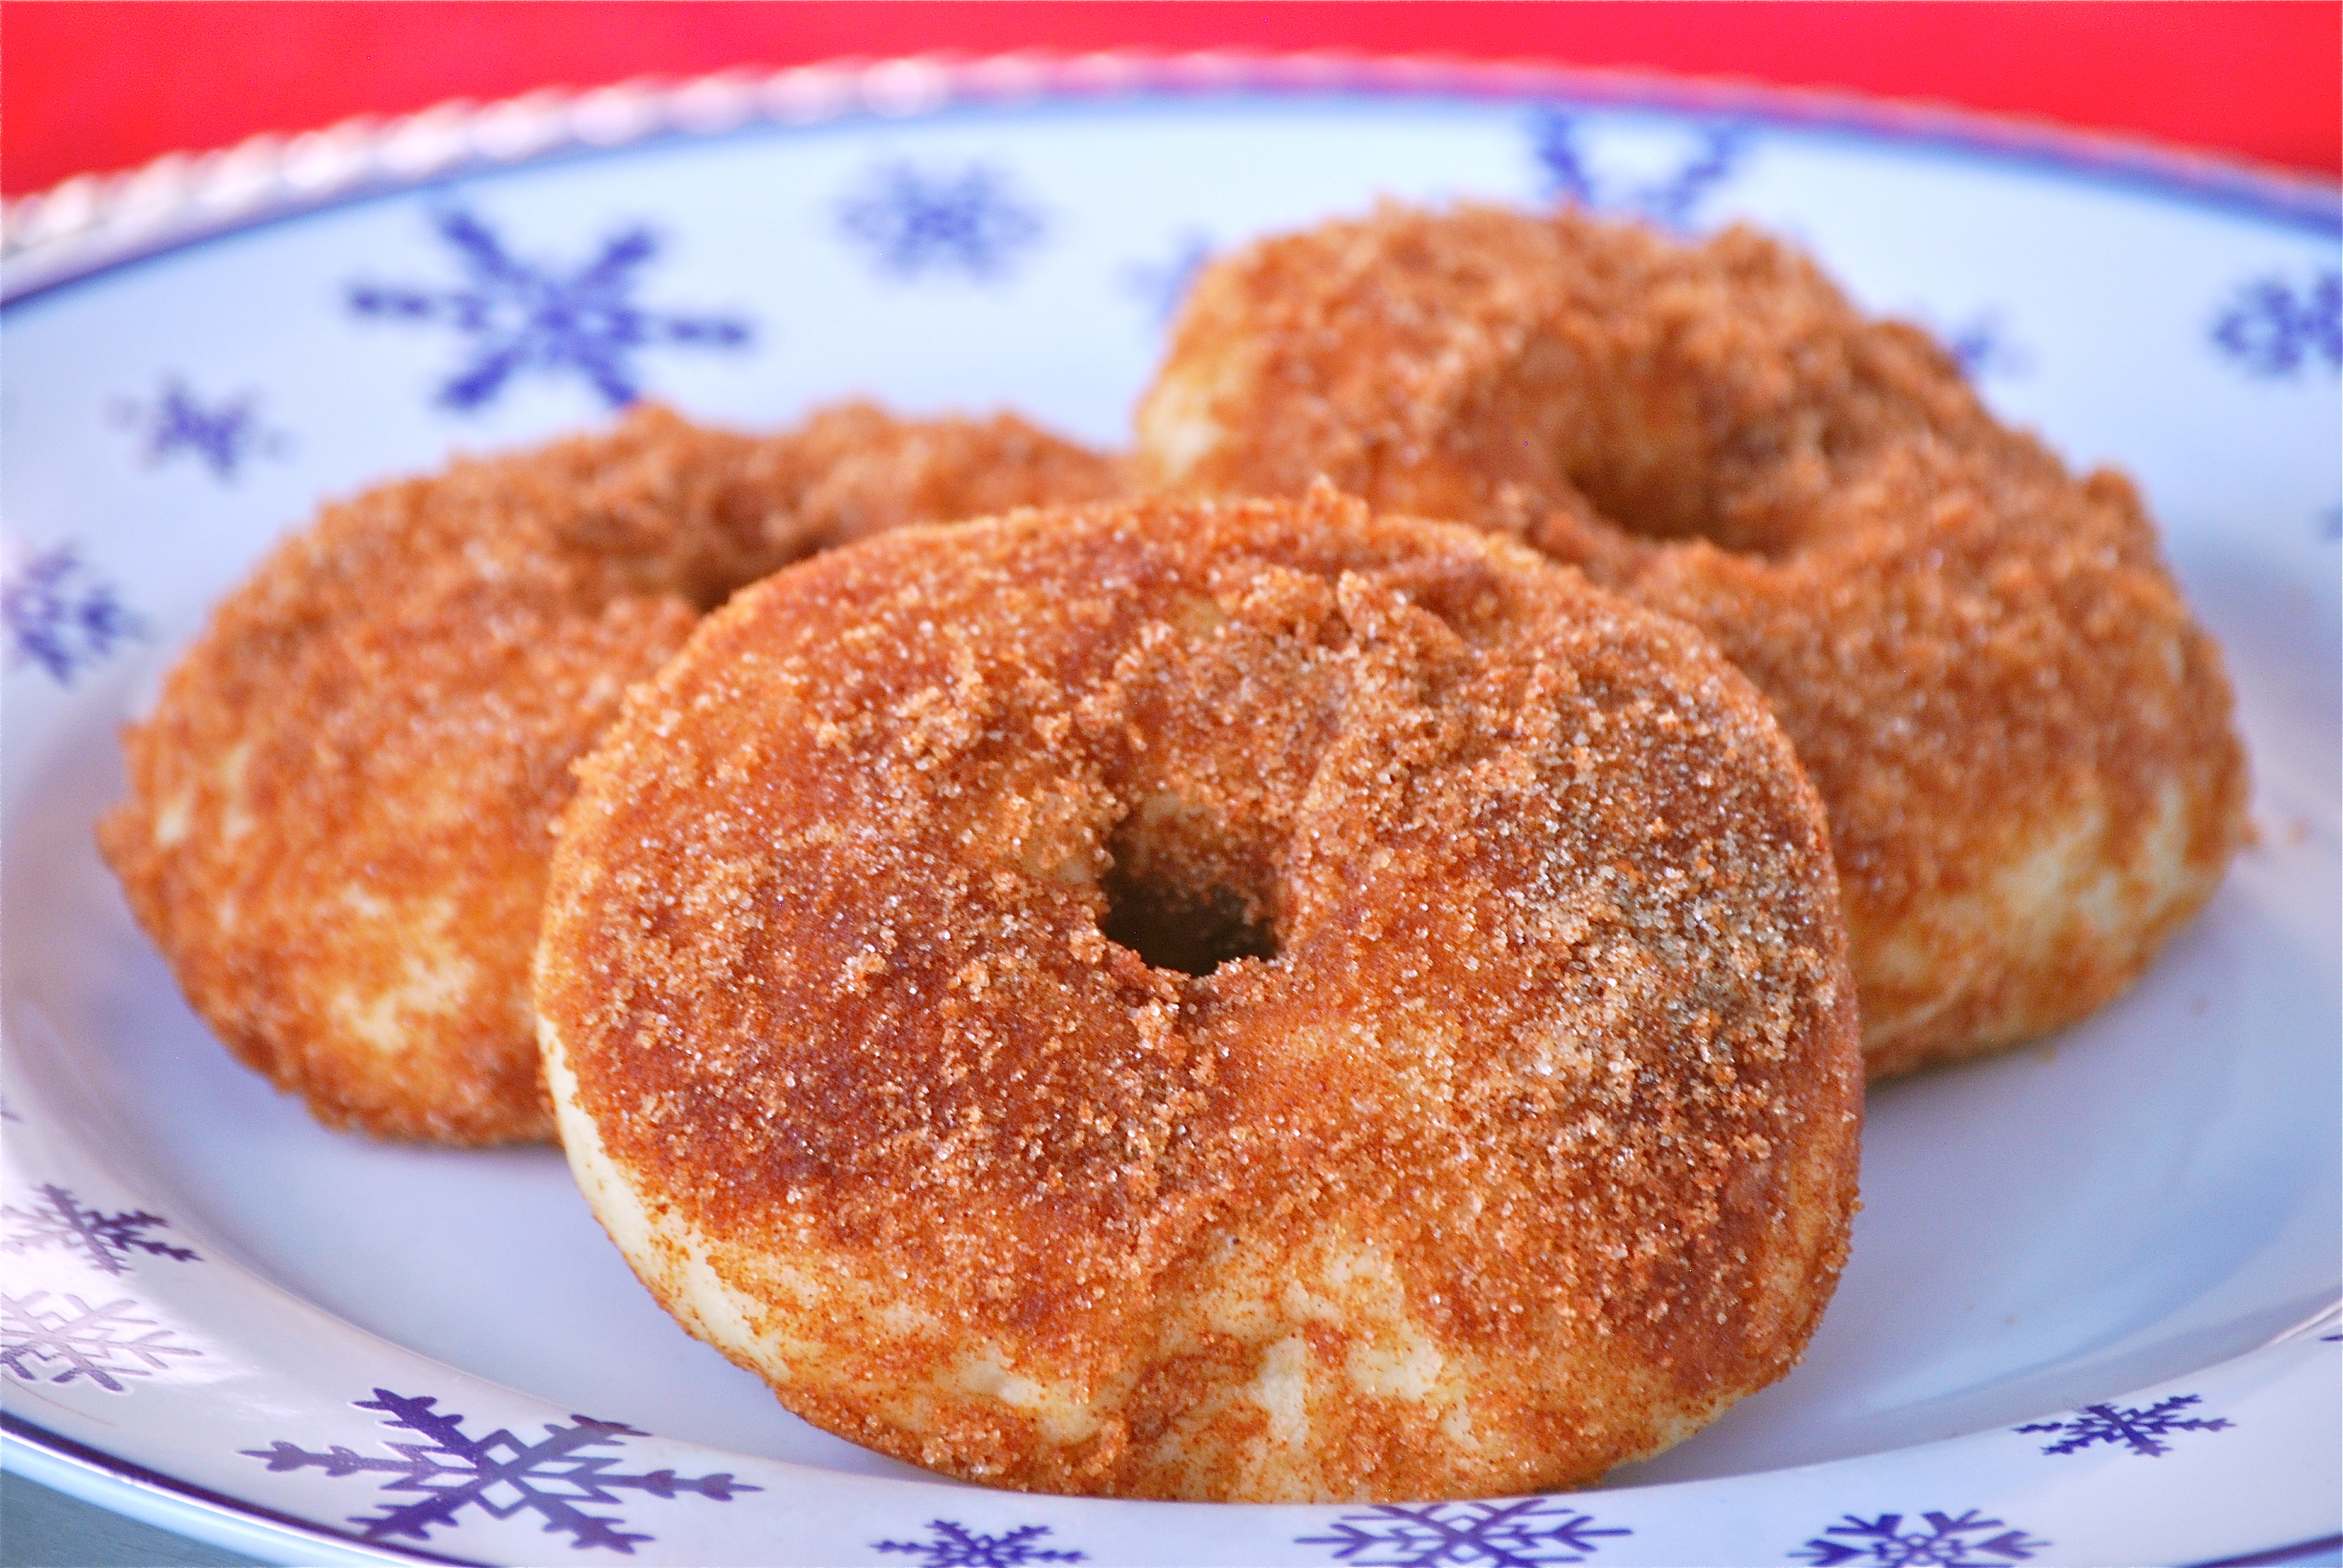 Baked Donuts with Cinnamon Sugar